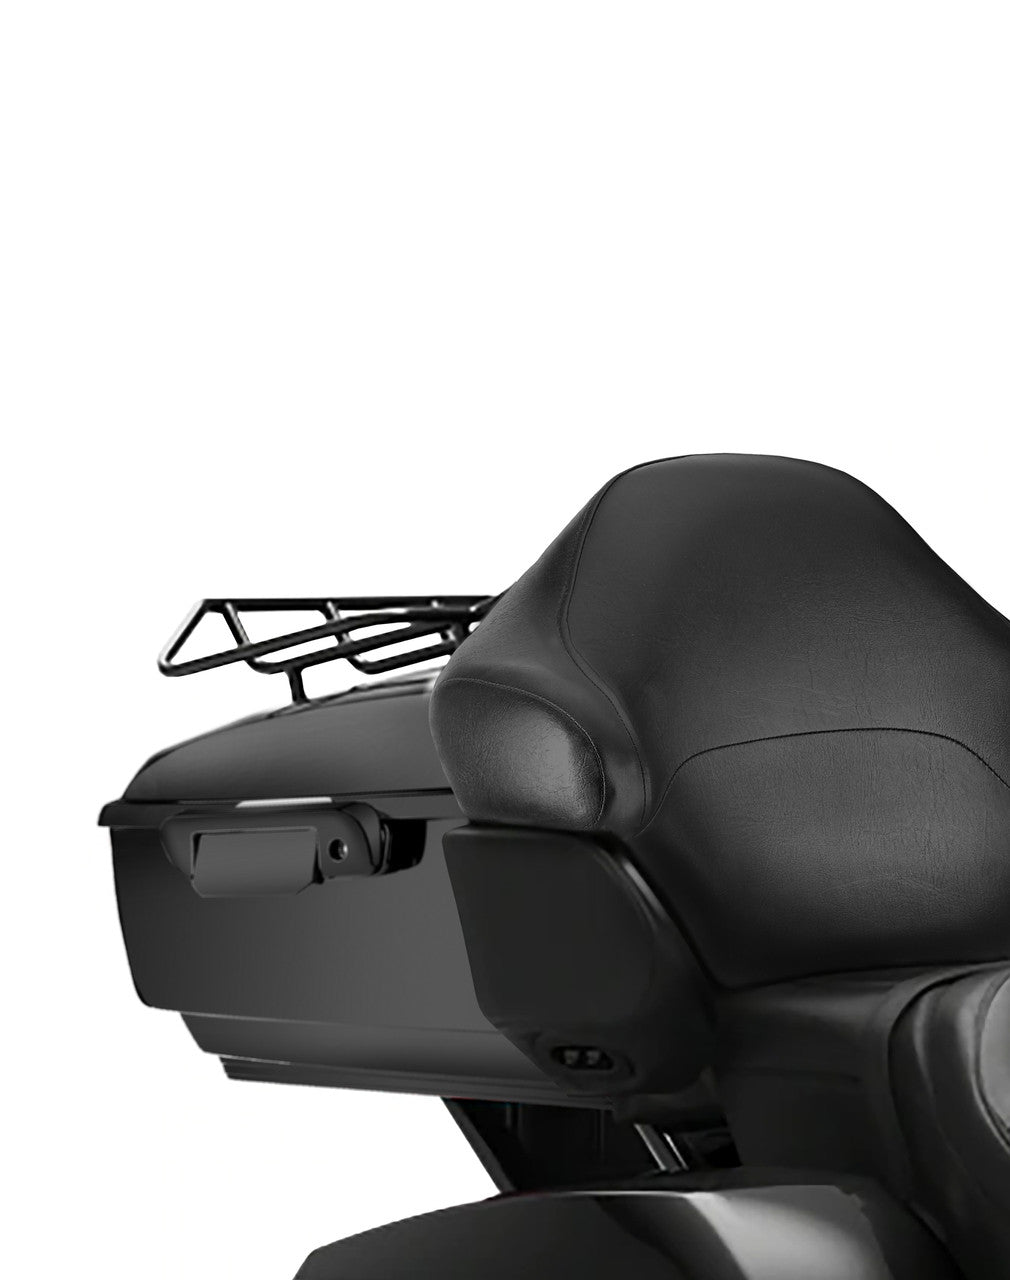 Viking Premium Extra Large Motorcycle Tour Pack for Harley Street Glide Backrest with Tourpack